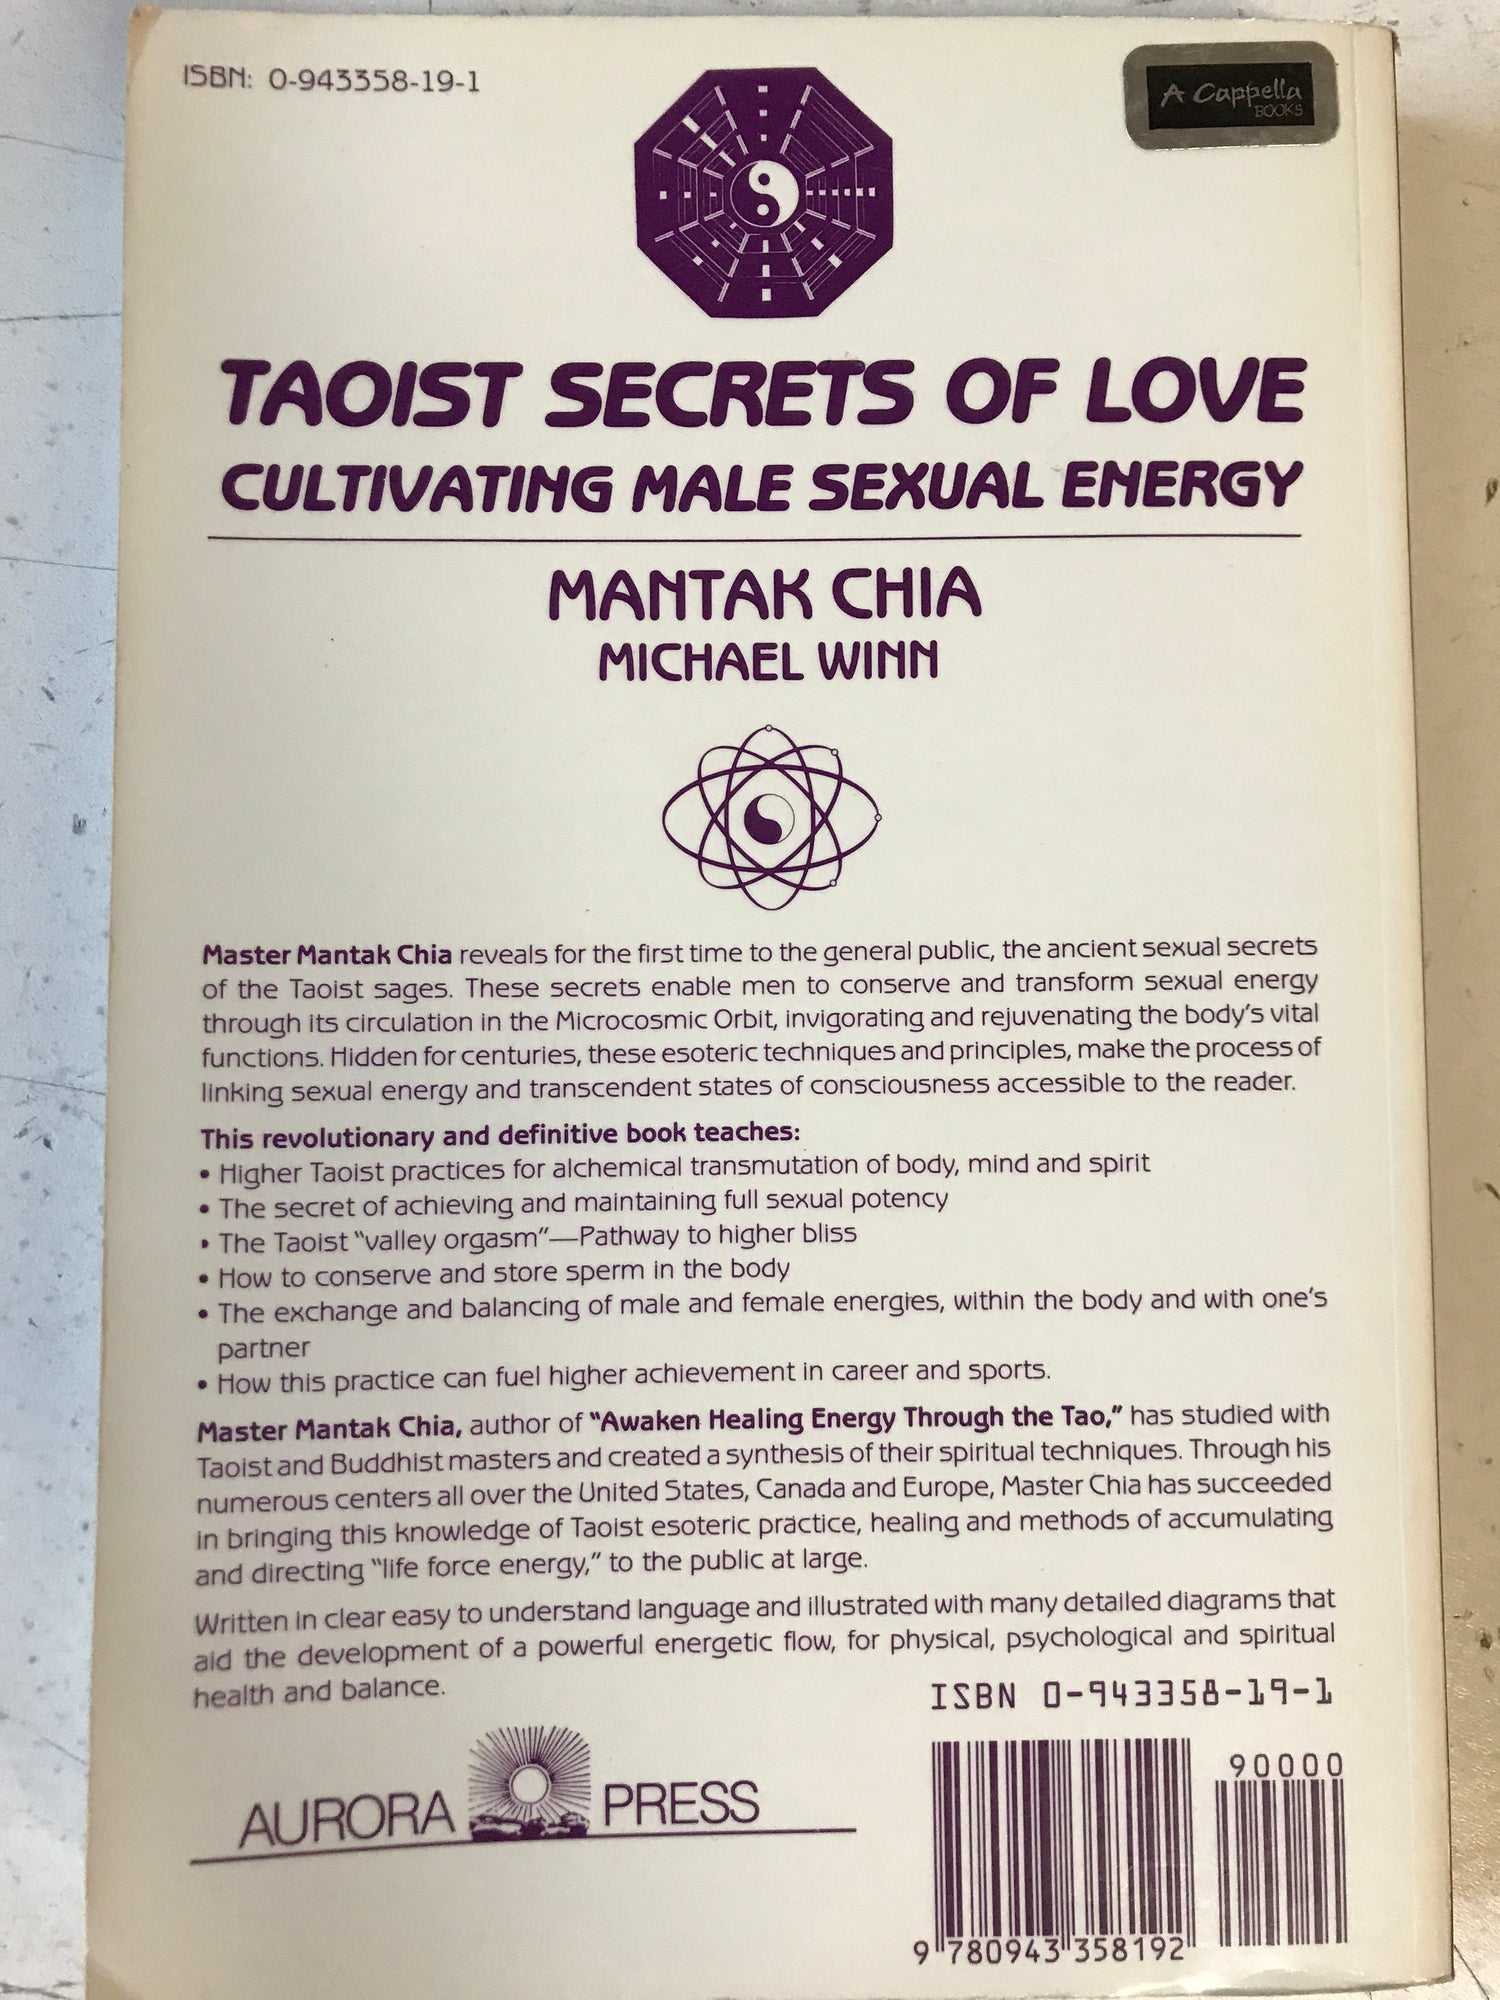 Taoist Secrets of Love: Cultivating Male Sexual Energy Book by Mantak Chia (Preowned) - Budovideos Inc